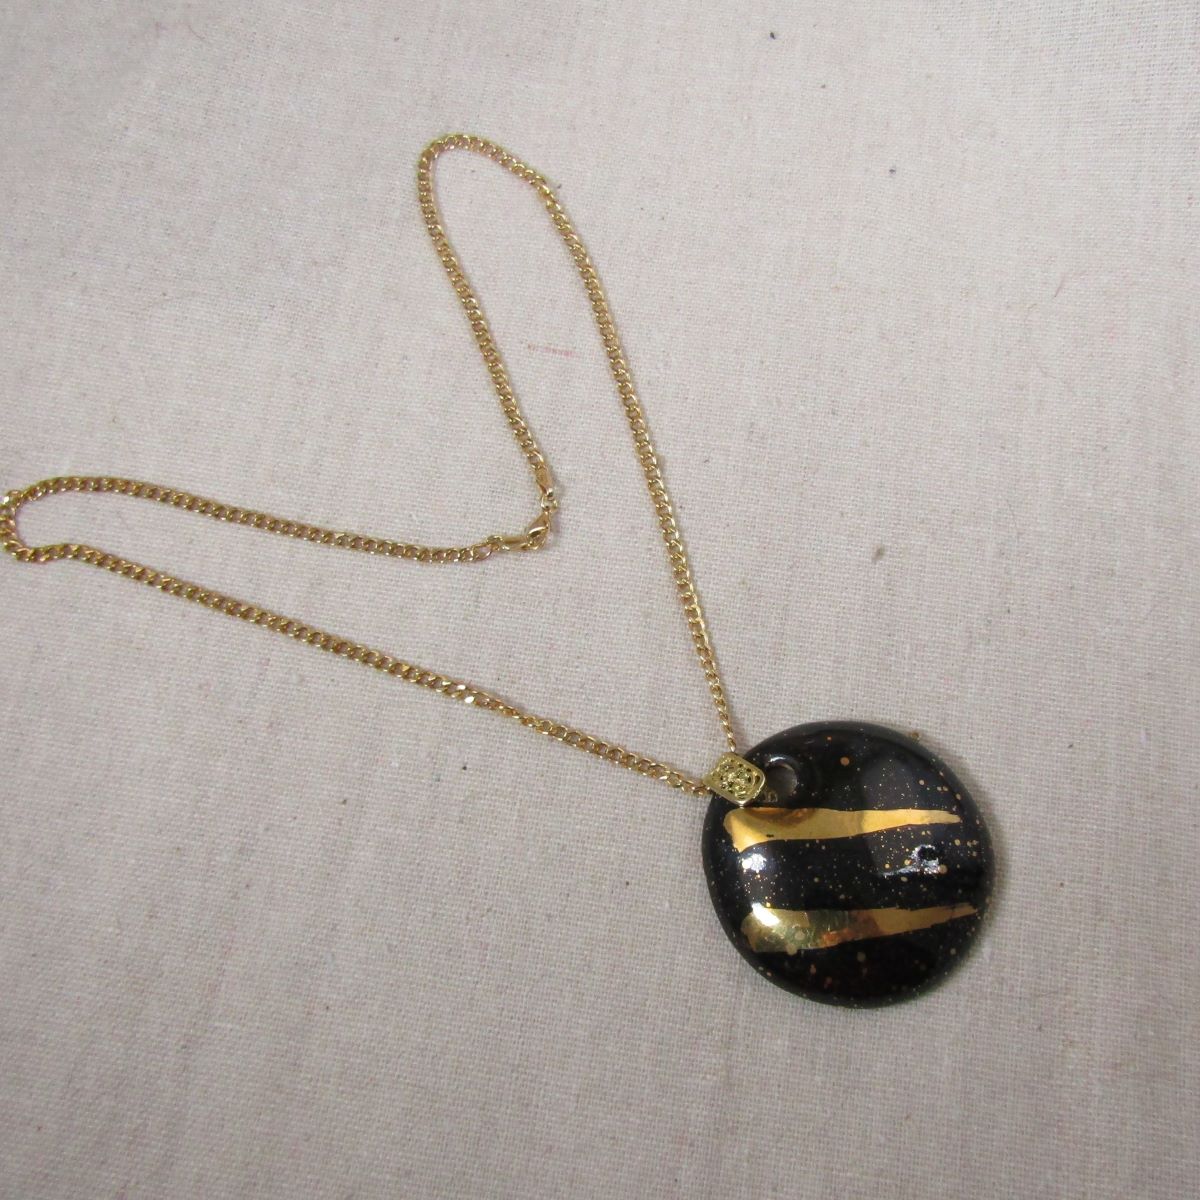 Black and Gold Large Kazuri Pendant Necklace - VP's Jewelry